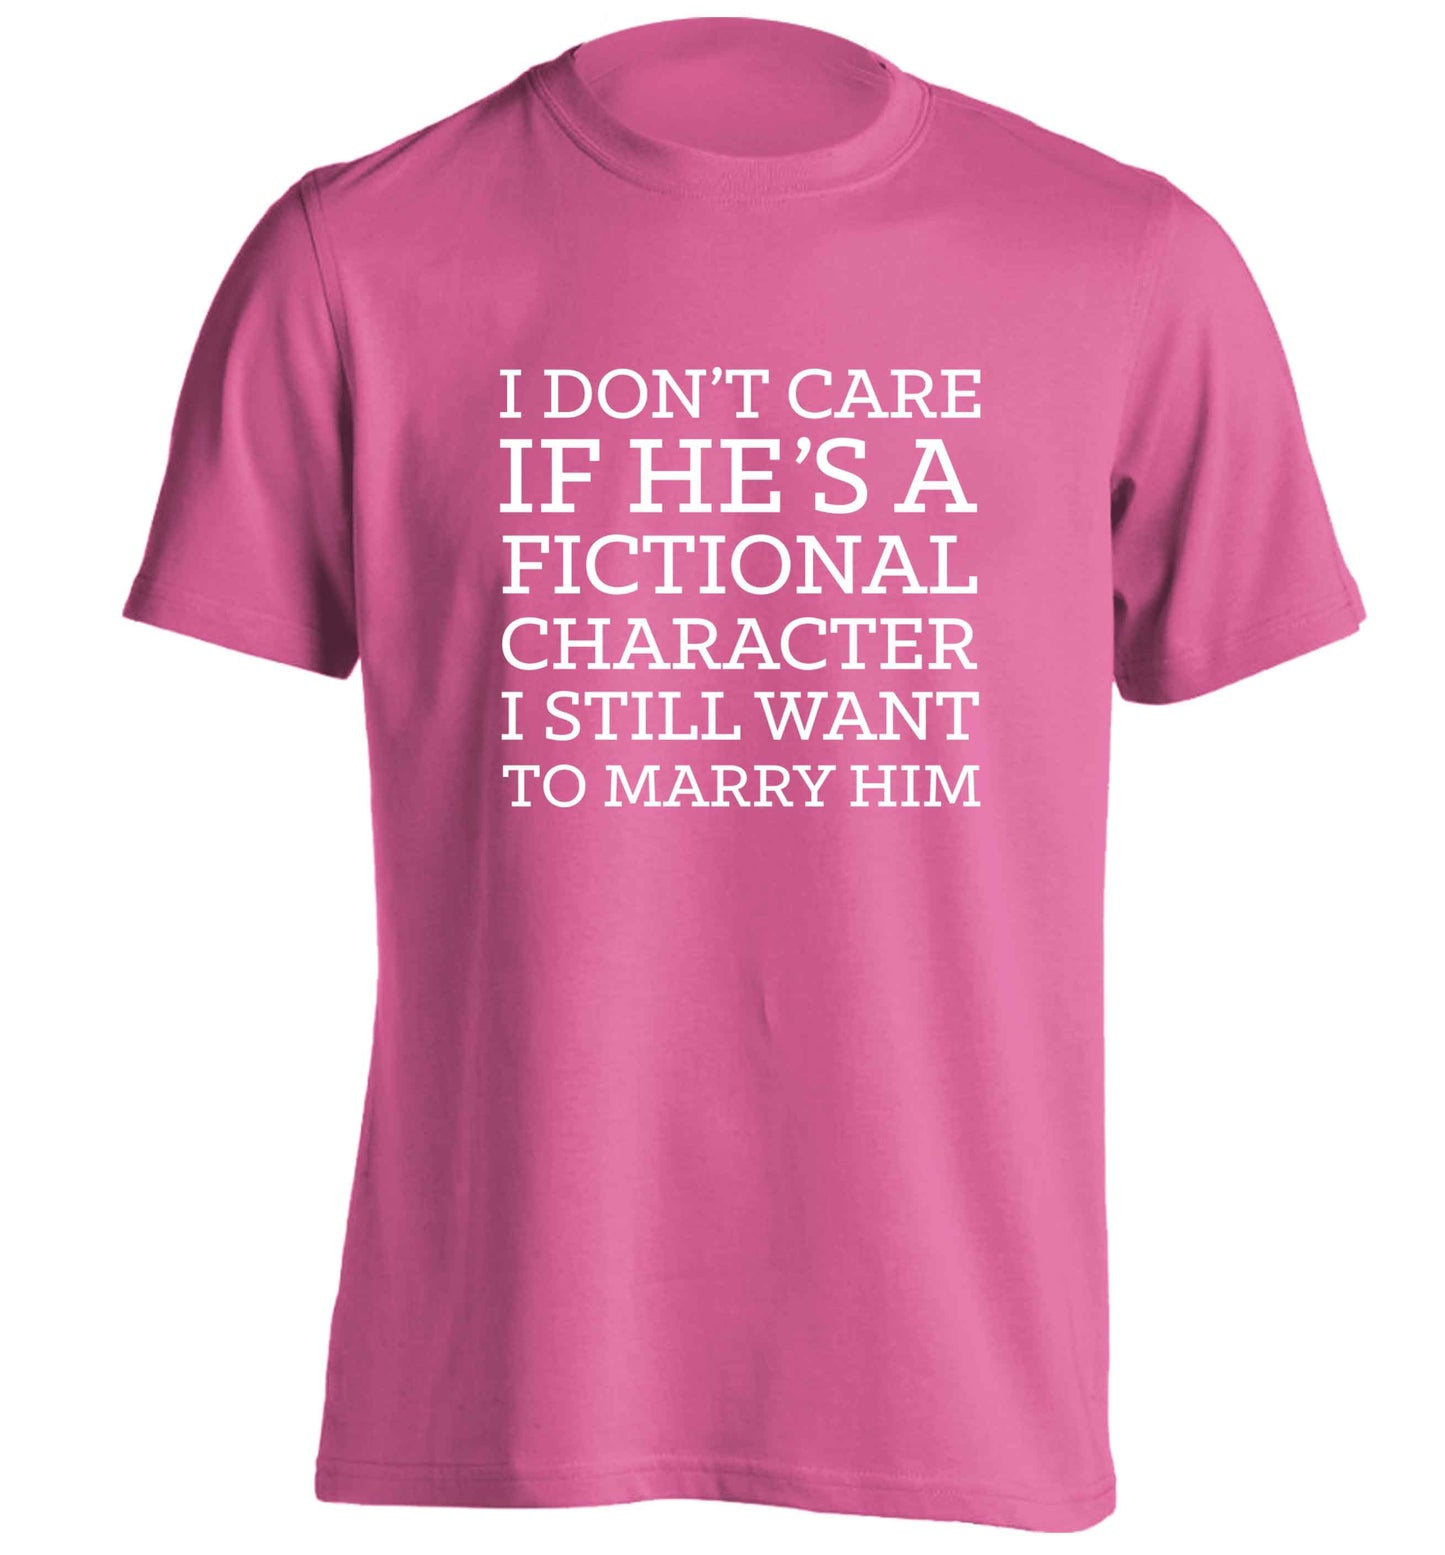 I don't care if he's a fictional character I still want to marry him adults unisex pink Tshirt 2XL